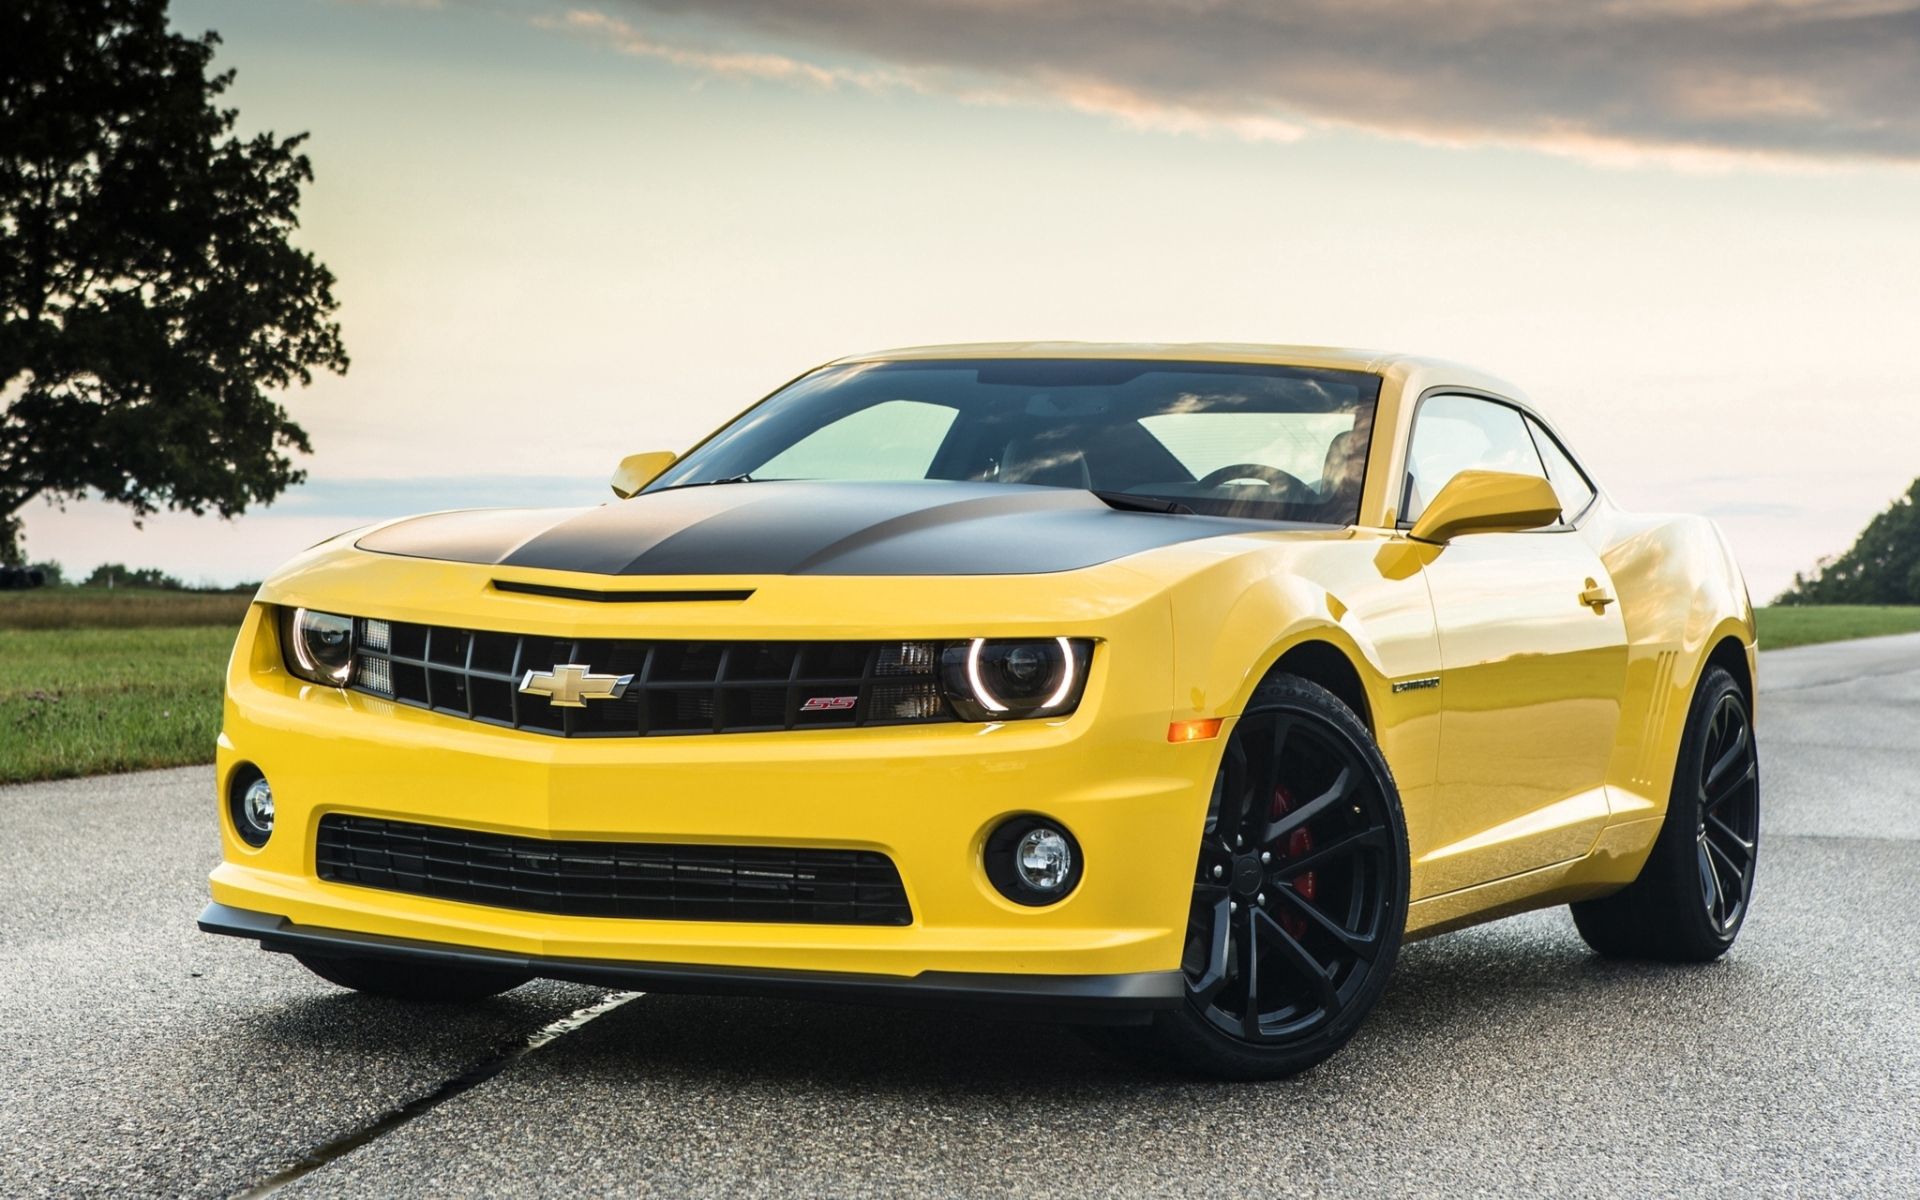 muscle car, chevrolet, camaro, sky, cars, yellow, wood, road, tree, limber, front end, 1le UHD